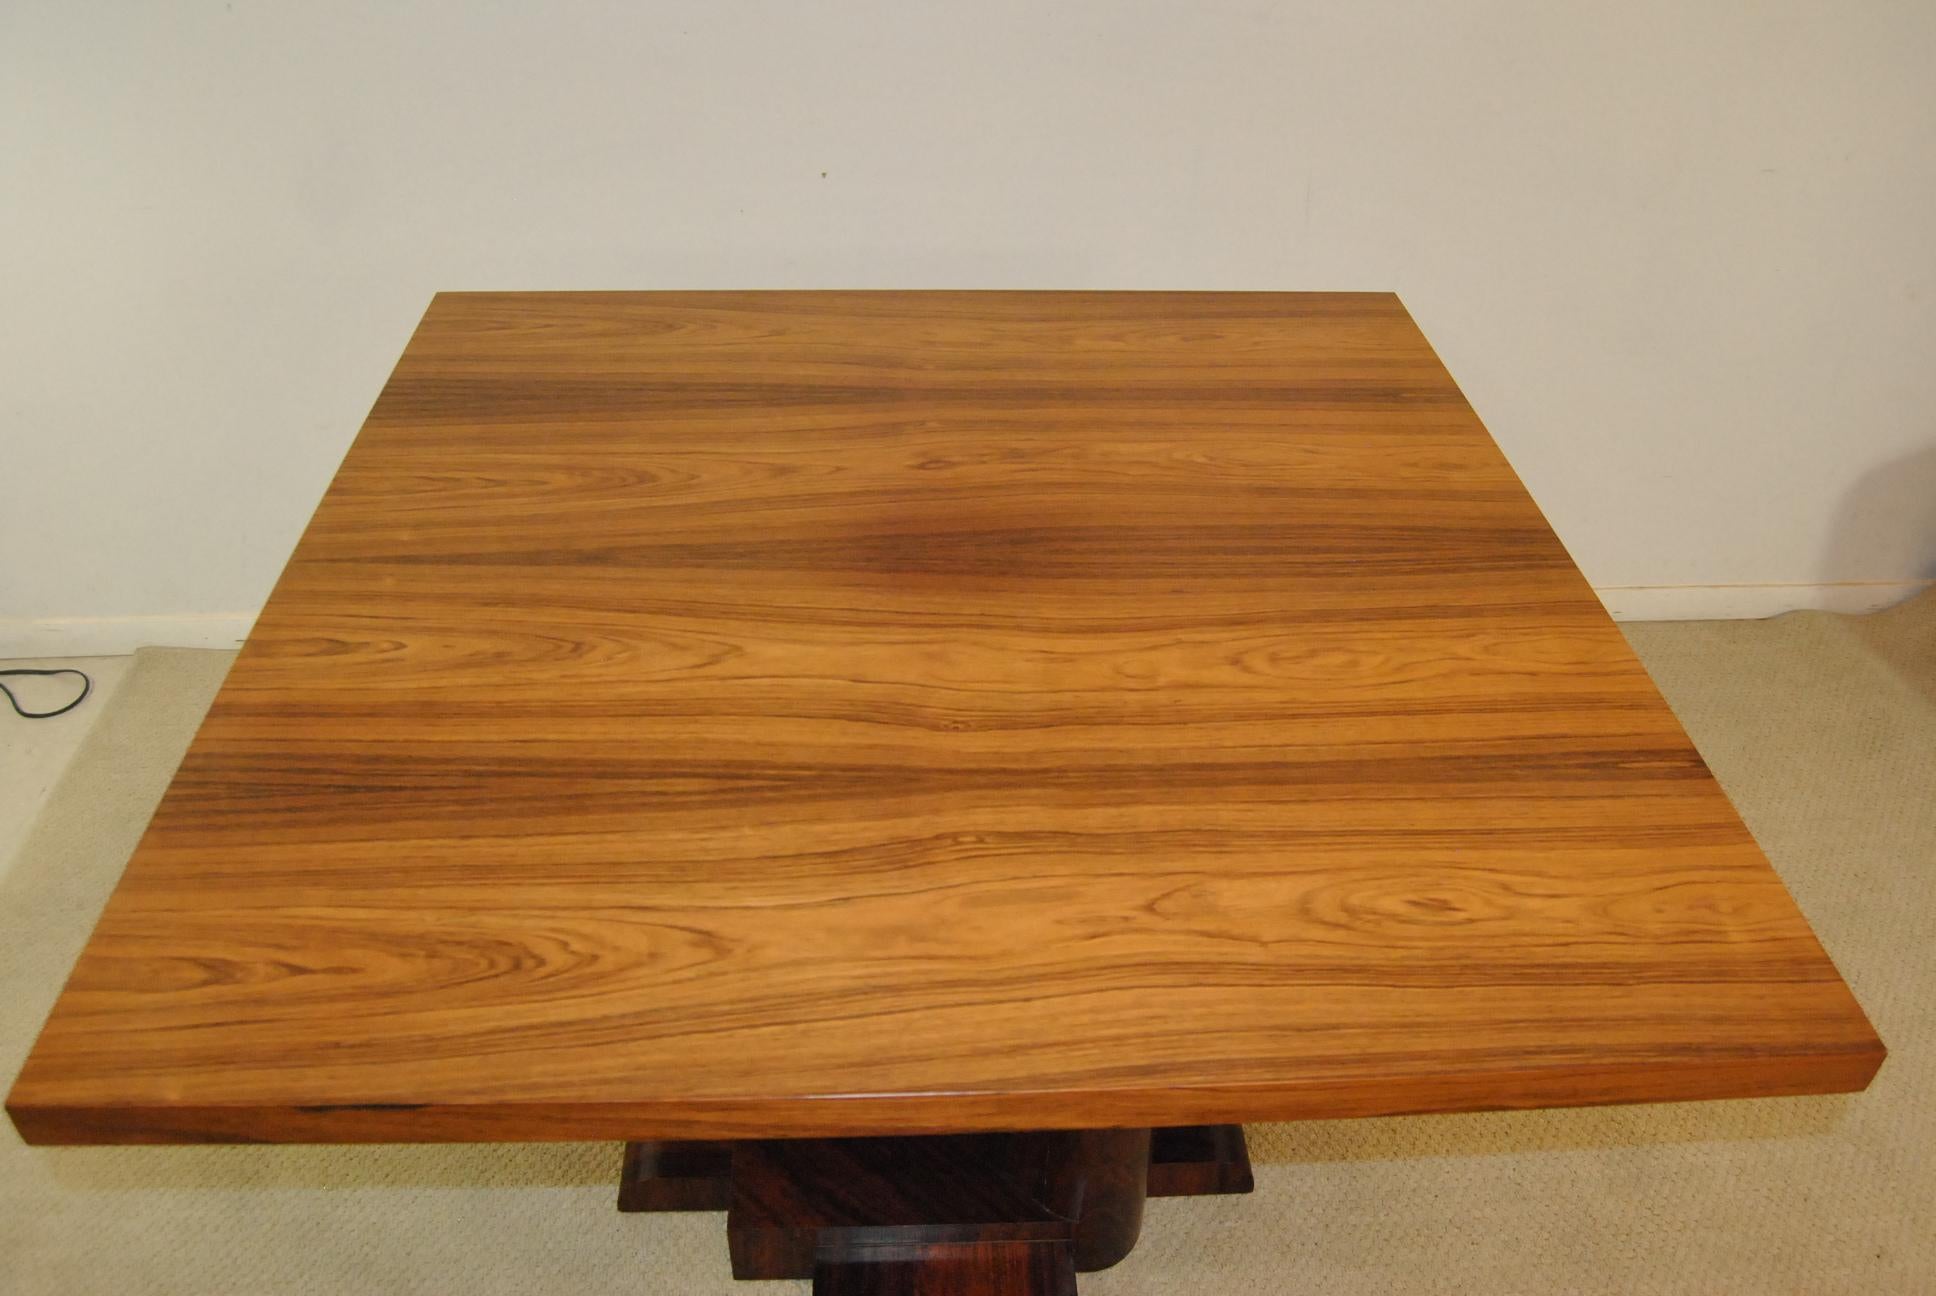 Late 20th Century Rosewood Centre Table by Larry Lazlo/Bexley Heath for Widdicomb Numbered 25/100 For Sale